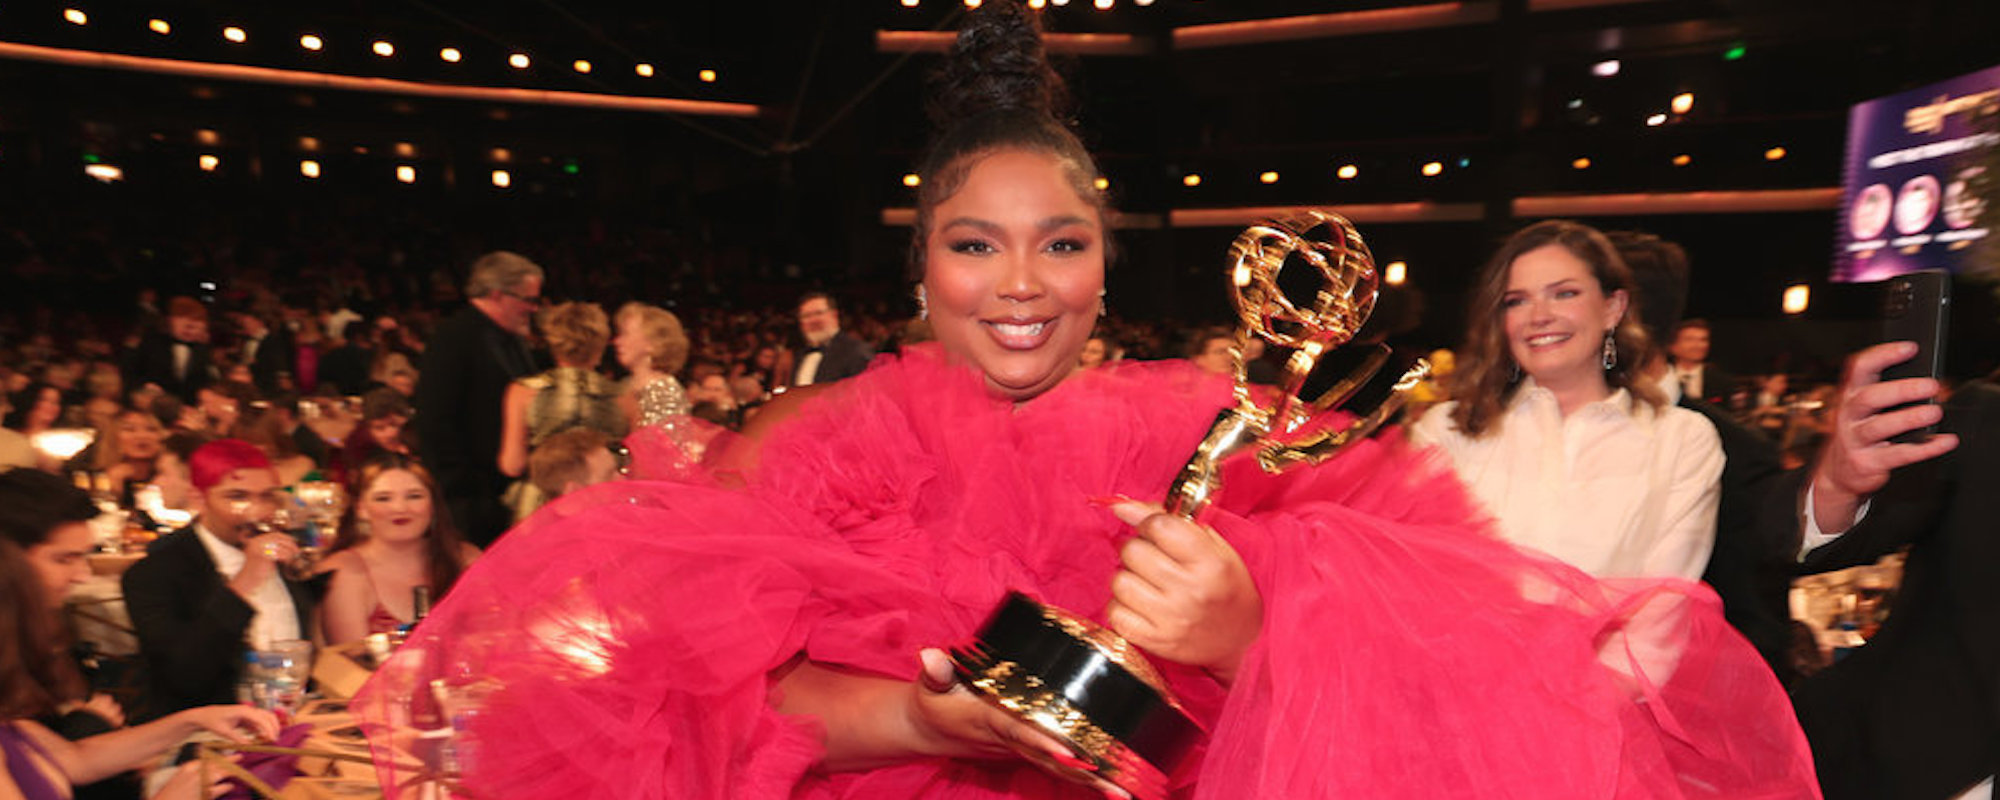 Lizzo is Halfway to EGOT Status, Joins The Beatles Doc, Zendaya and Other 2022 Emmy Award Music Winners